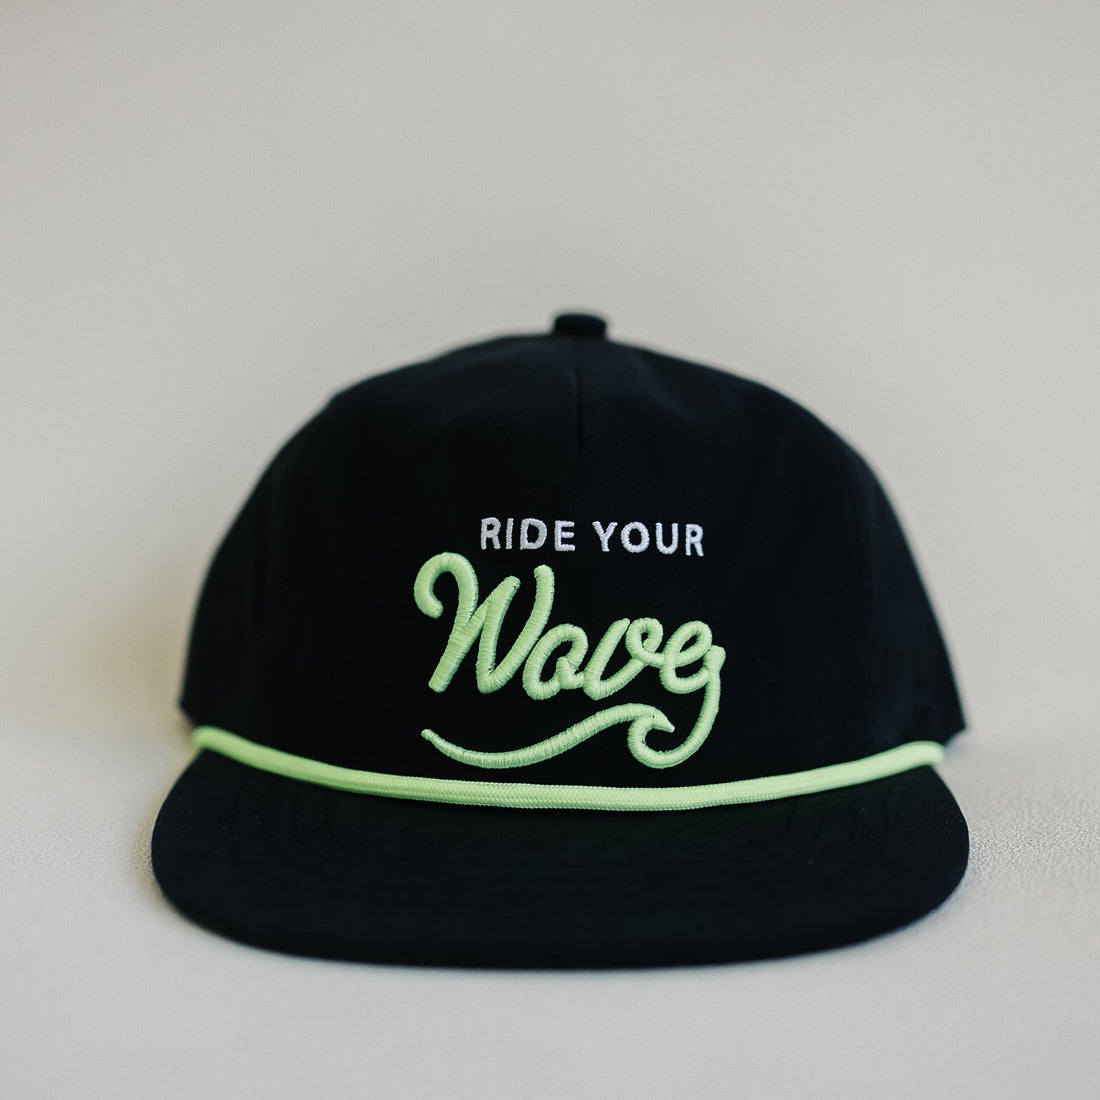 Ride Your Wave - Black